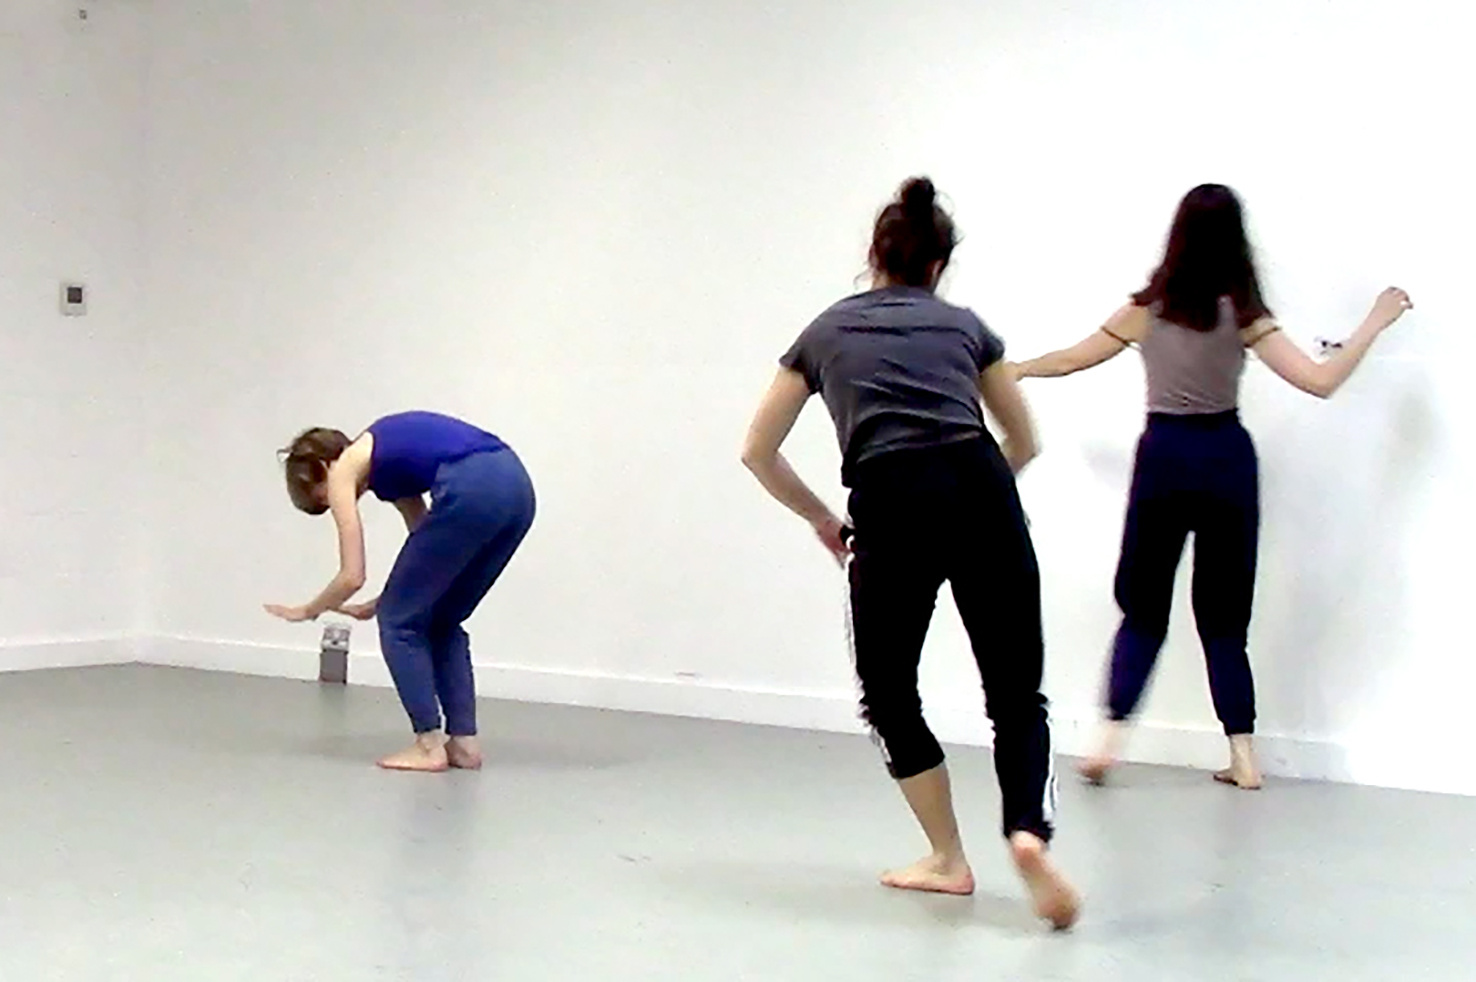 Three young women can be seen moving through the room in dancing movements.